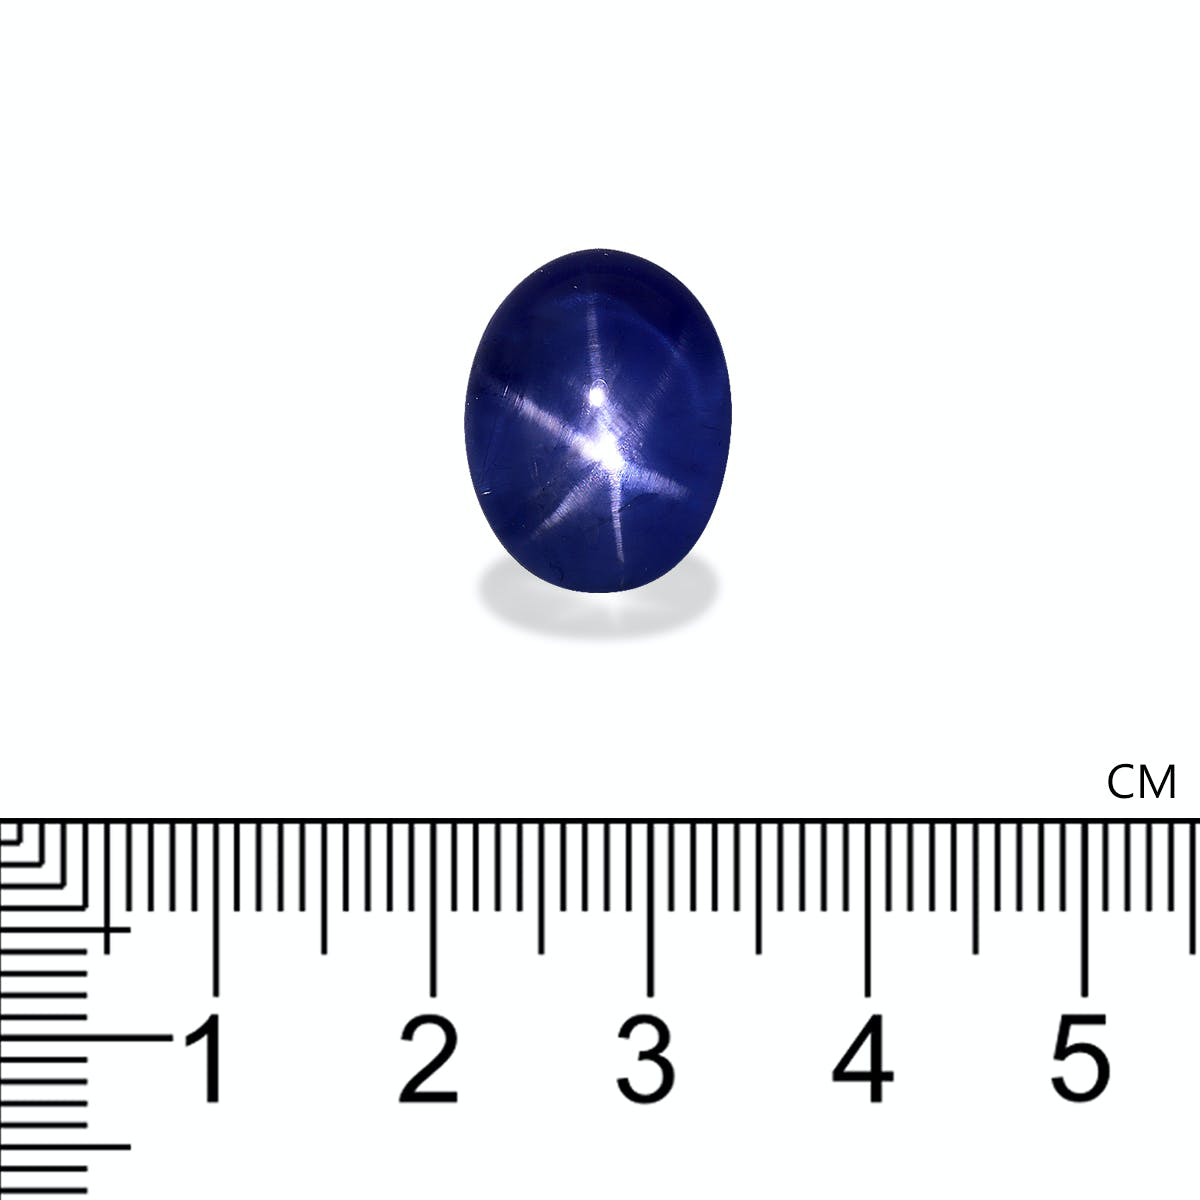 Picture of Blue Star Sapphire 17.81ct (BR0081)